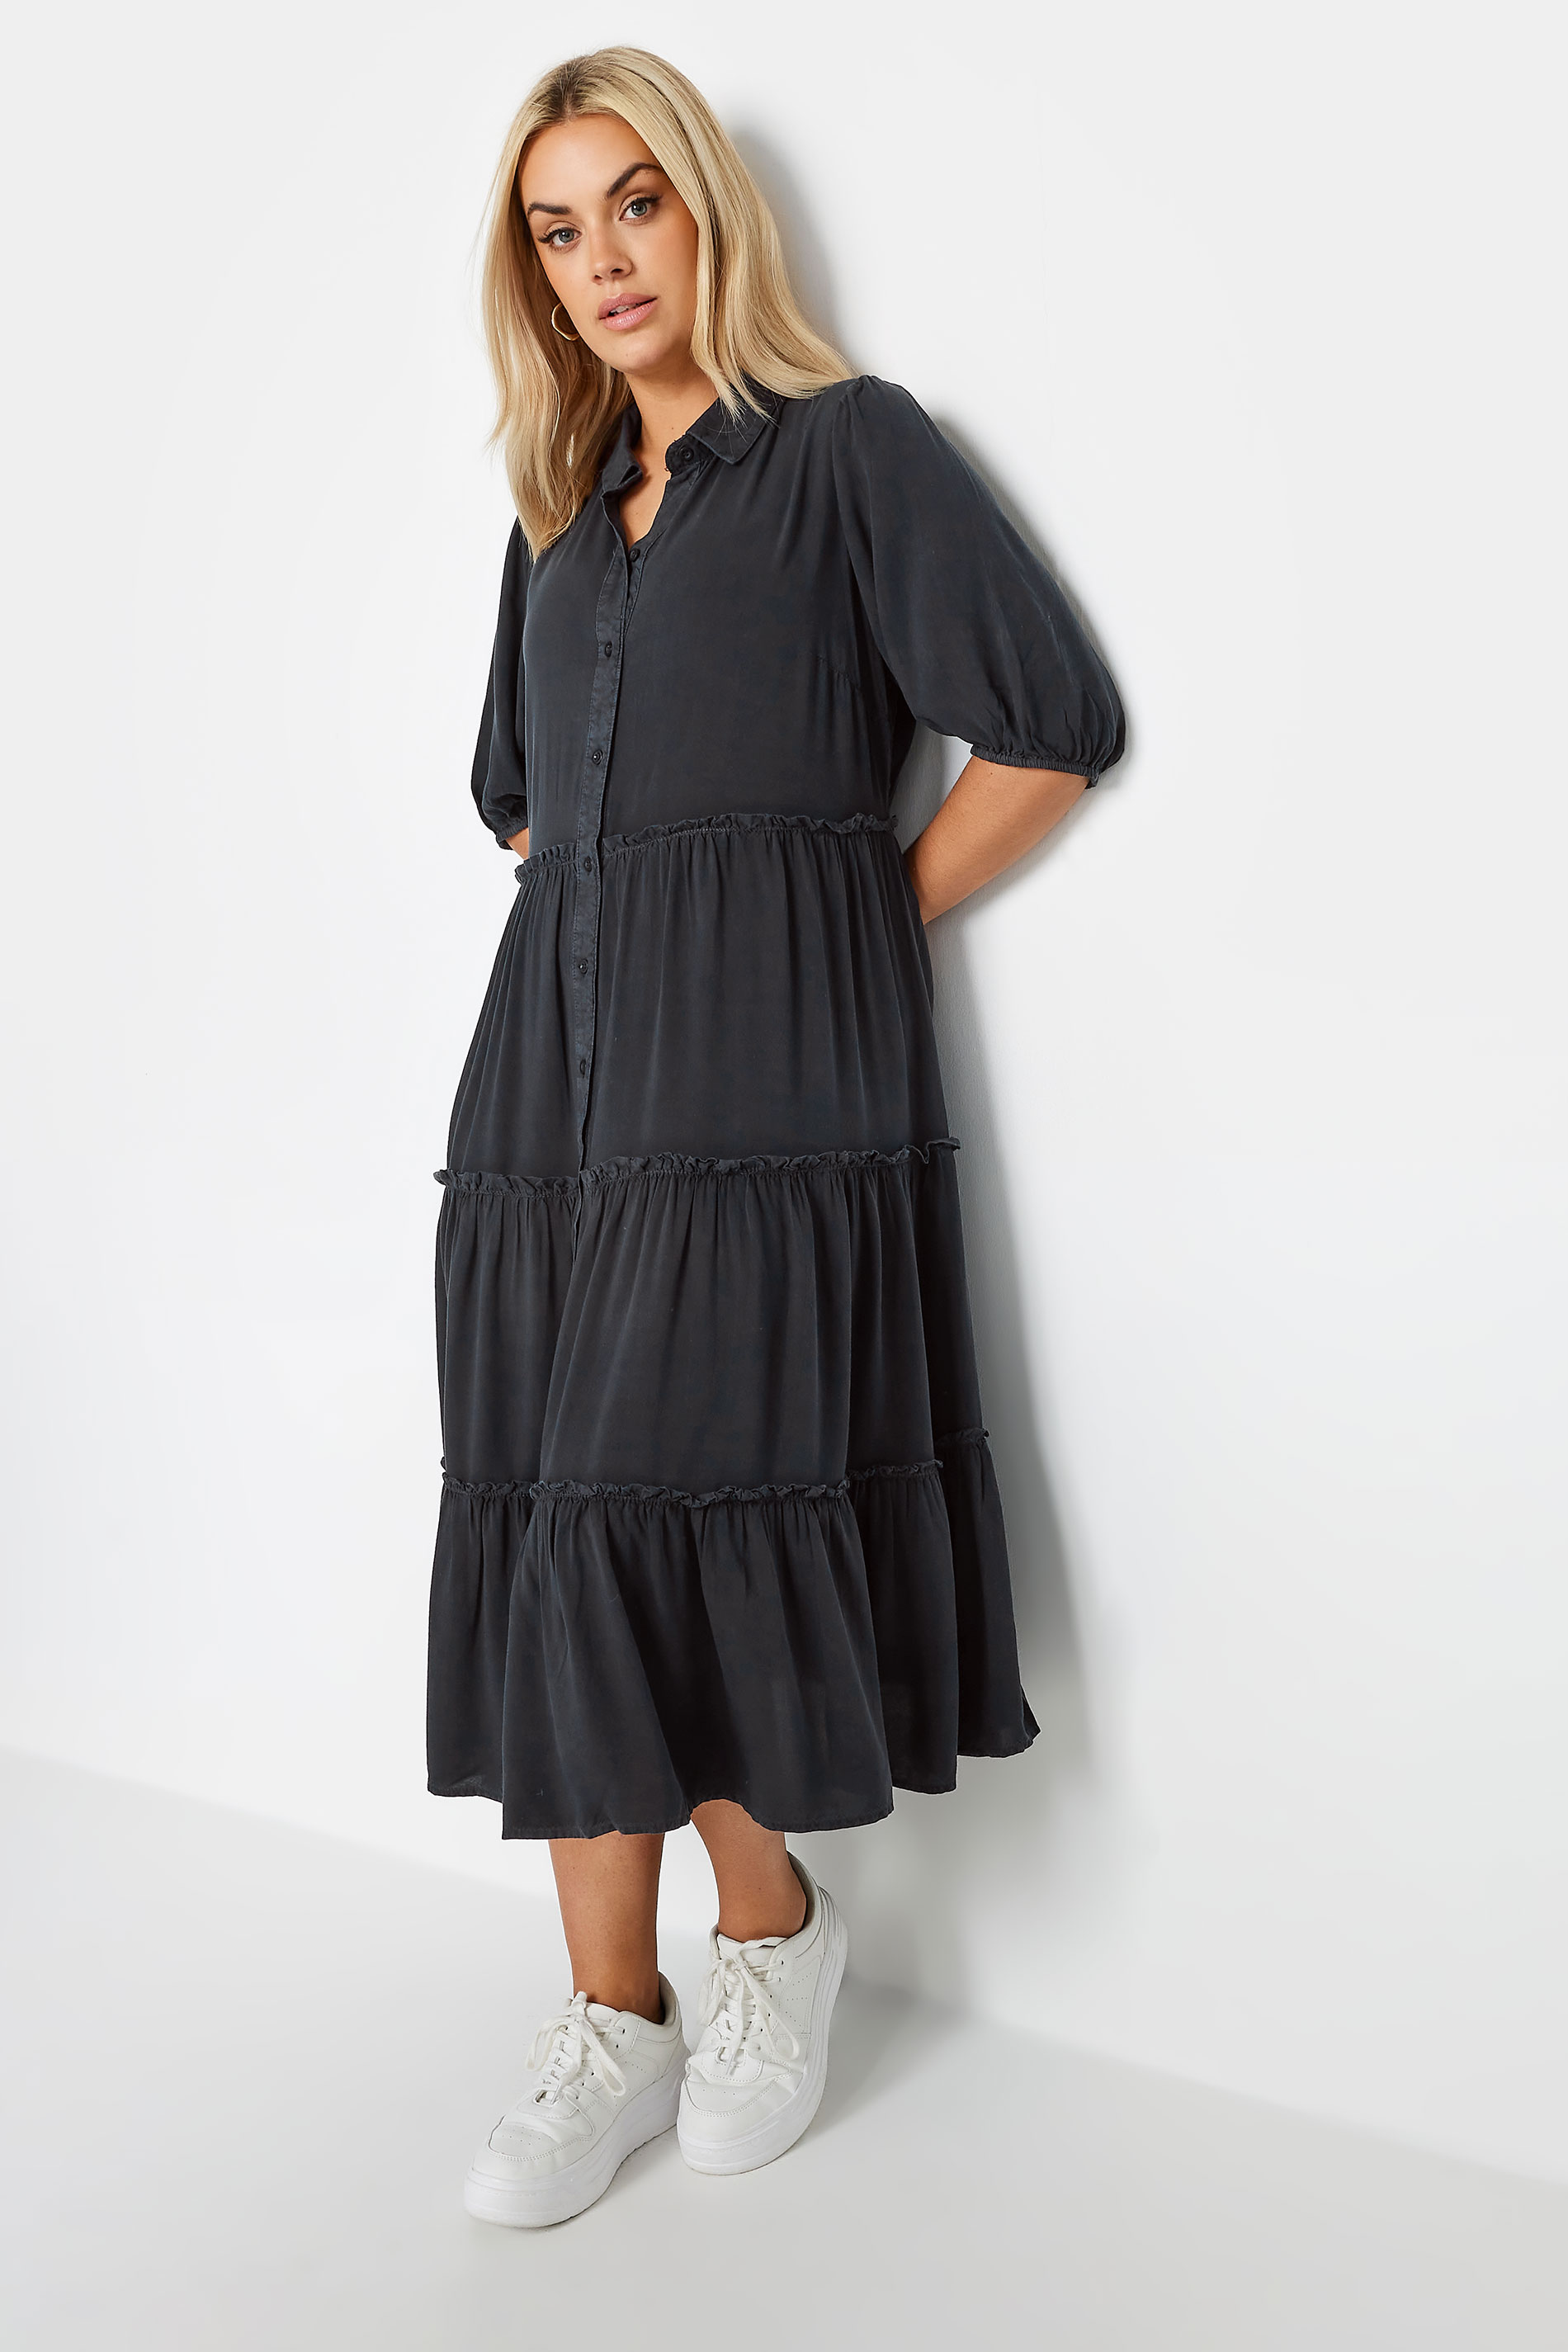 YOURS Plus Size Charcoal Grey Midaxi Shirt Dress | Yours Clothing 1